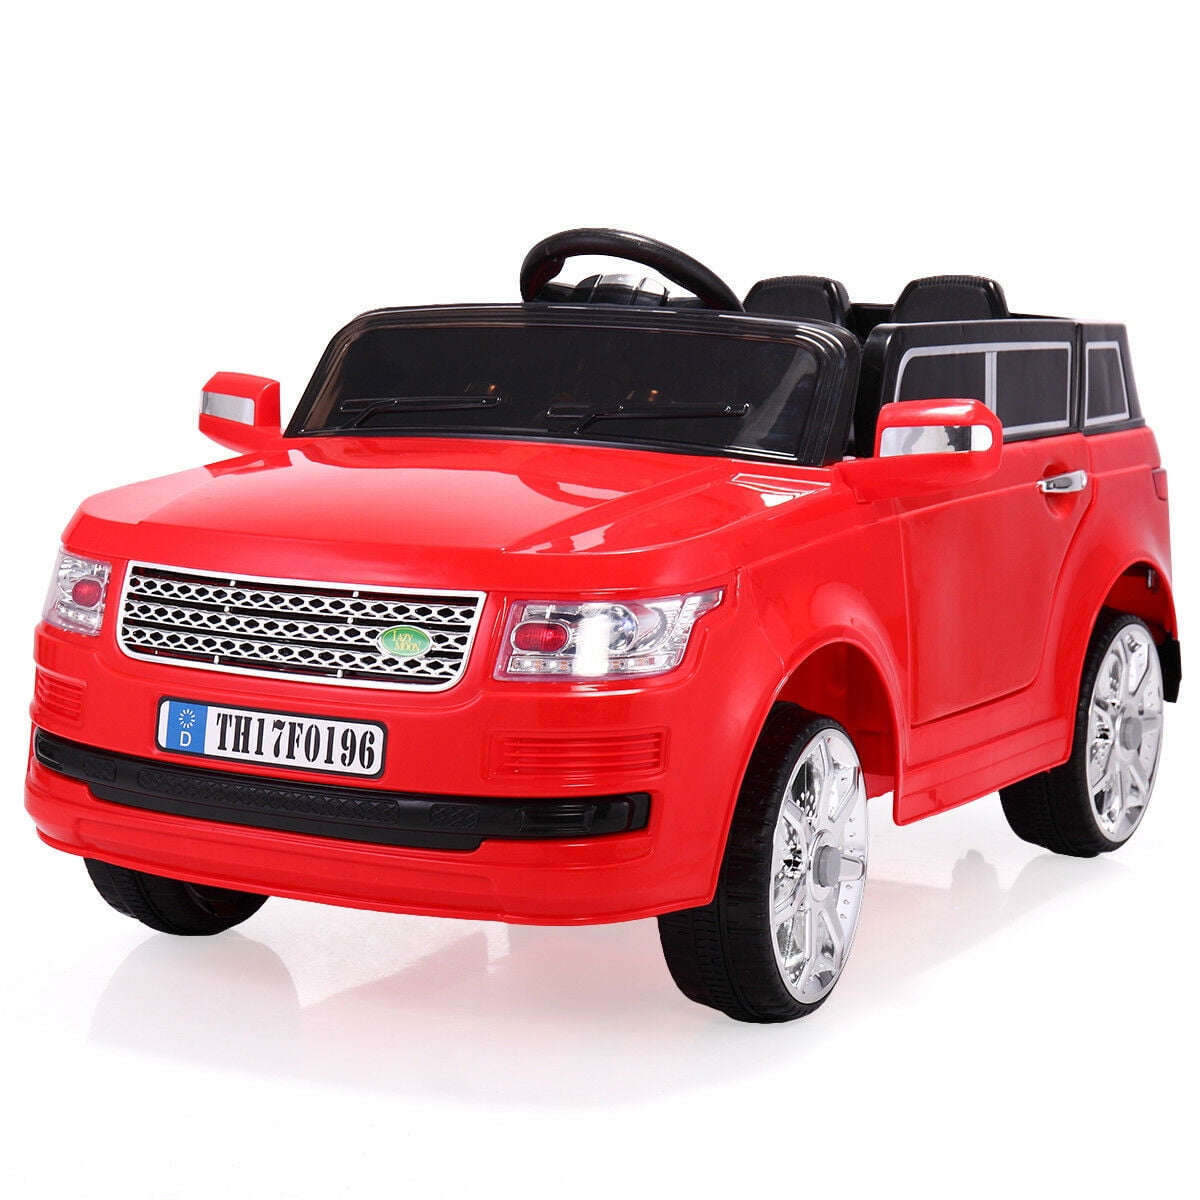 Senbabe Electric Cars for Kids, Red Electric Cars for Kids to Ride ...